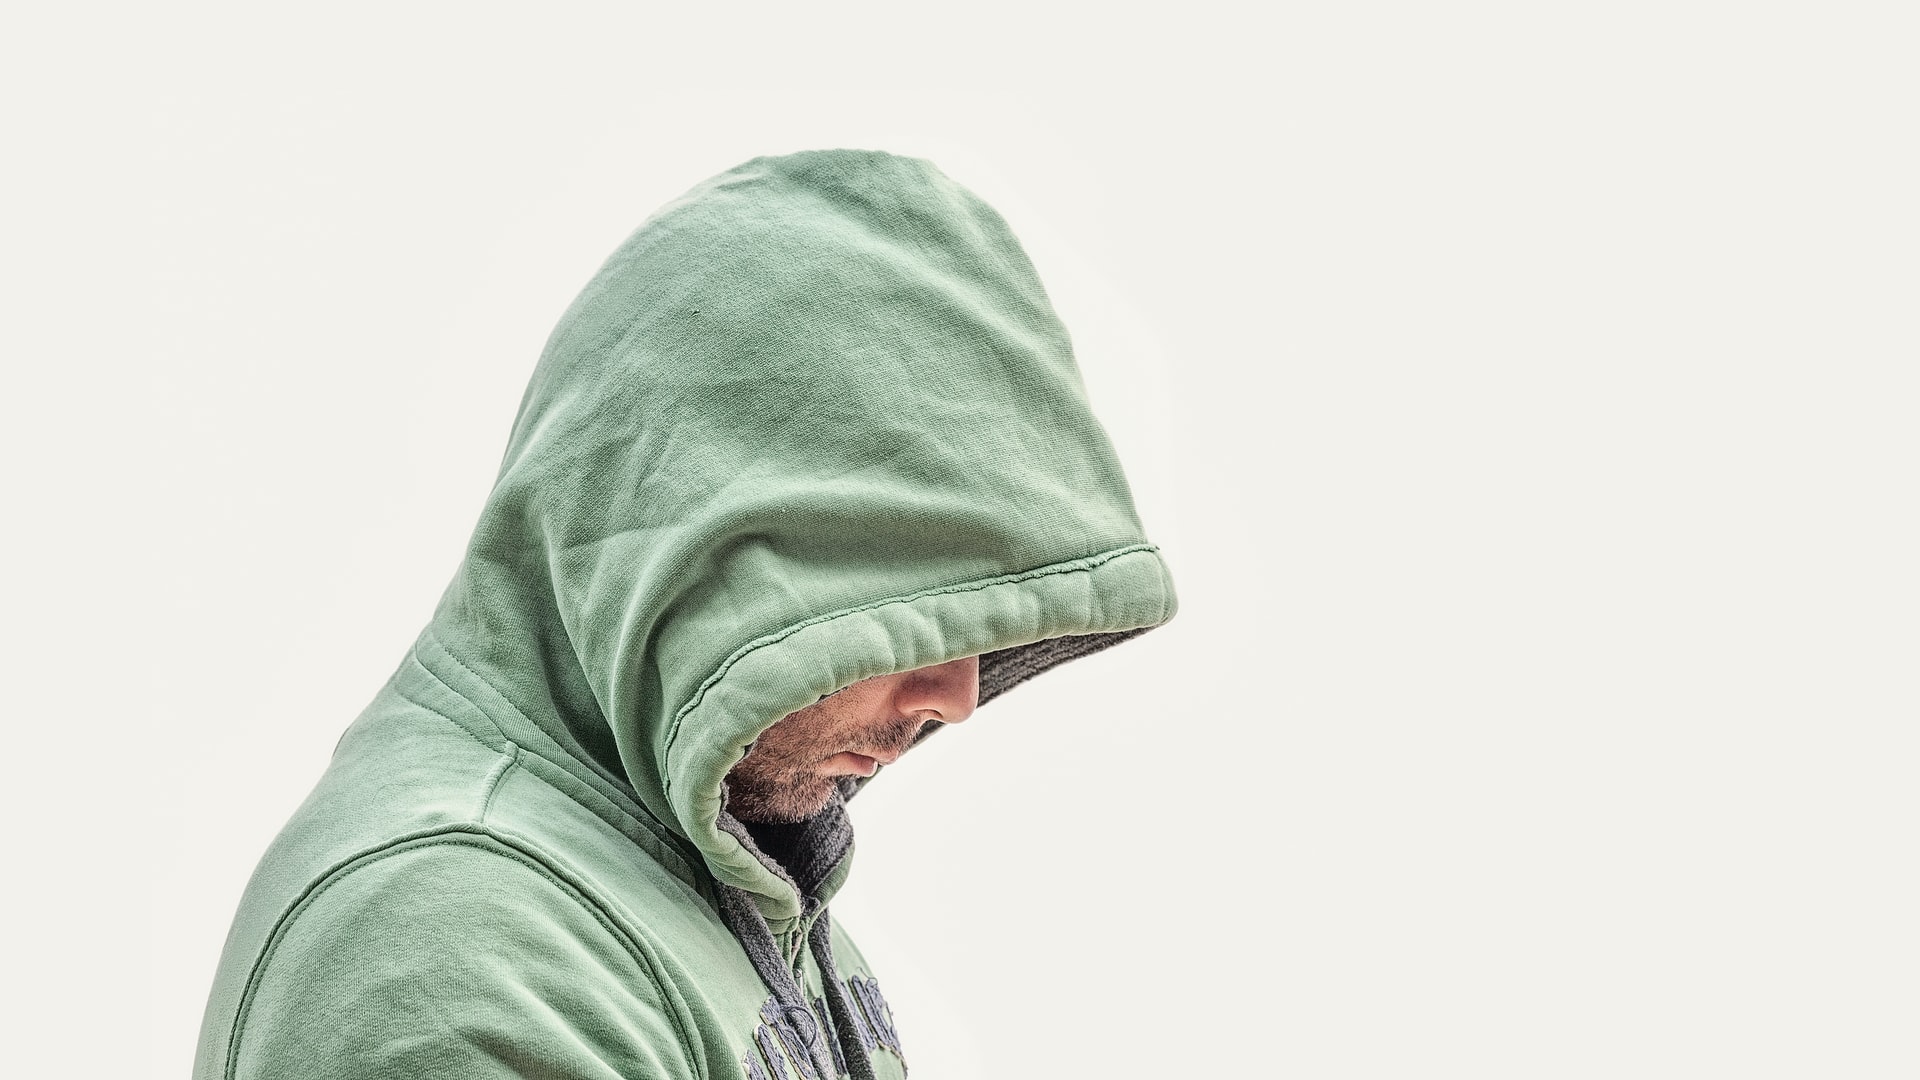 Portrait of a man's half showing face while wearing a hoodie